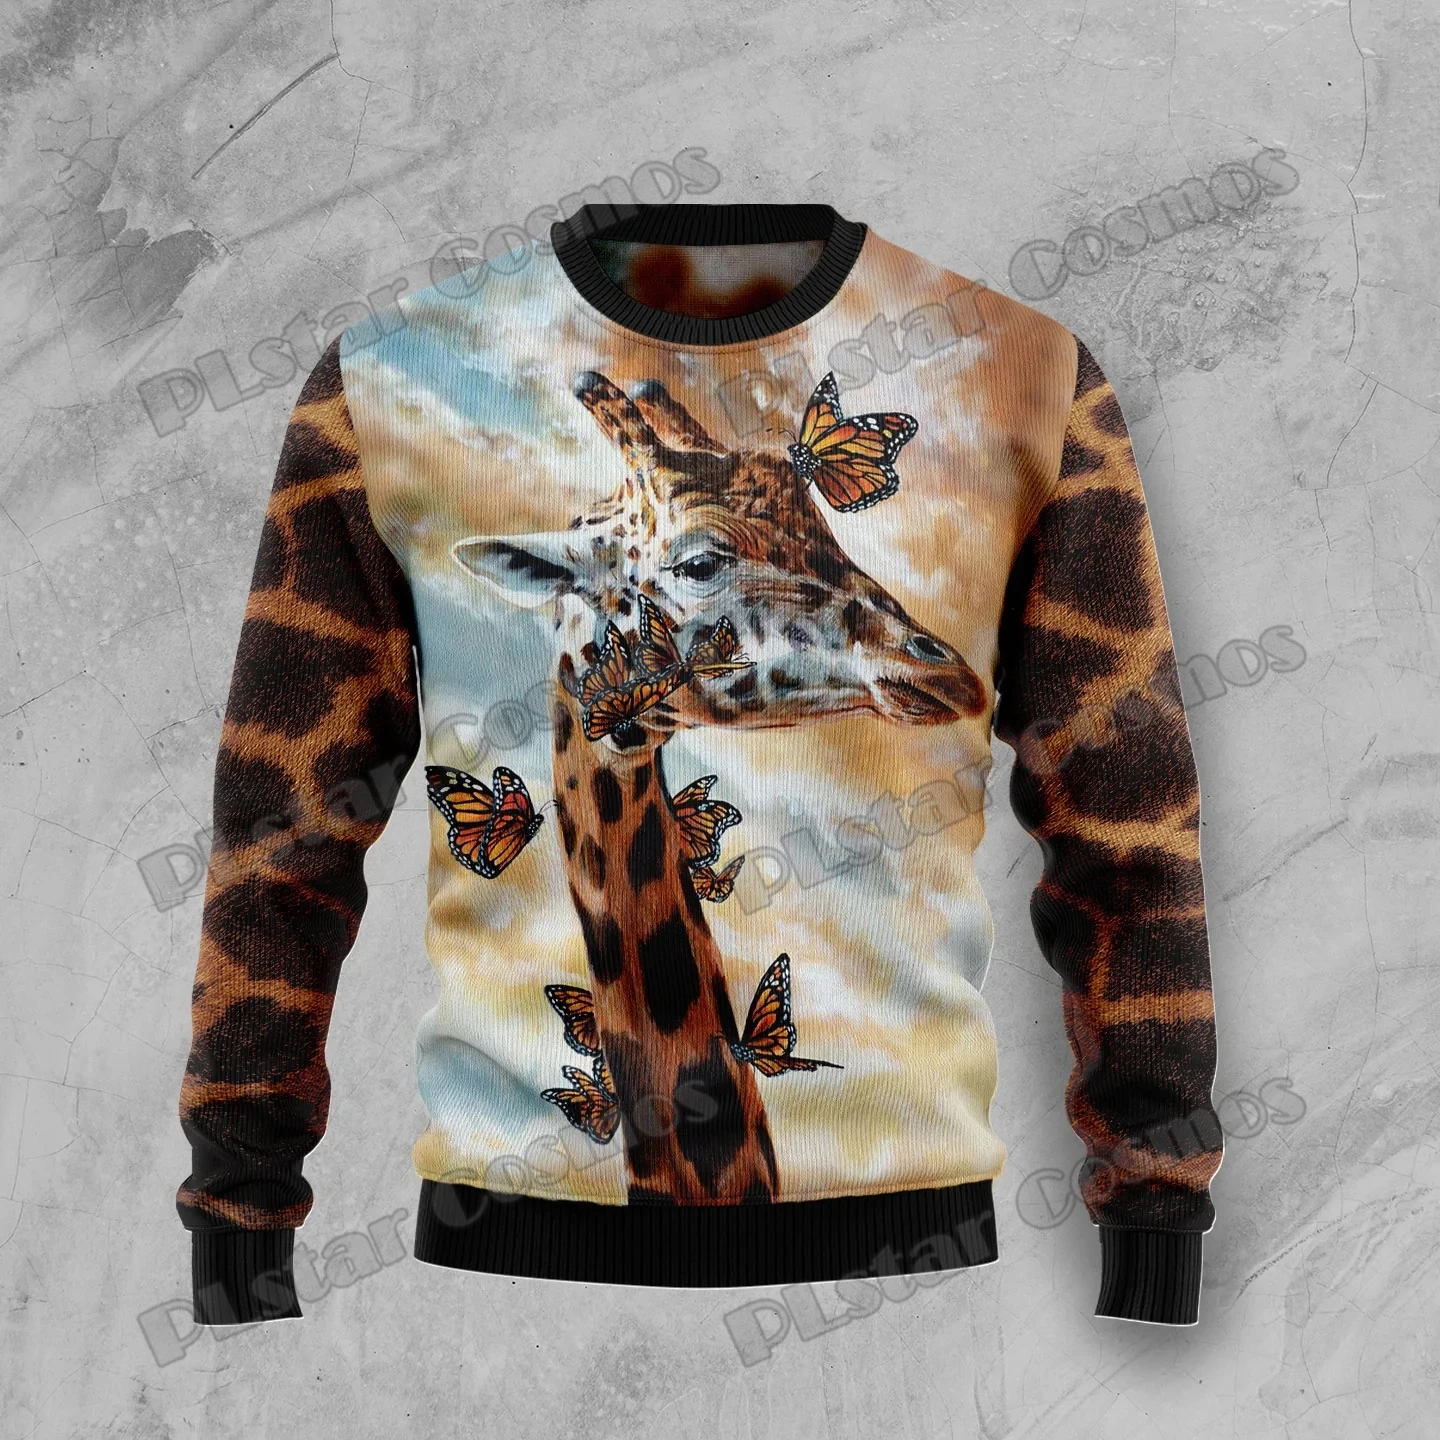 PLstar Cosmos Giraffe Butterfly 3D Printed Fashion Men's Ugly Christmas Sweater Winter Unisex Casual Knit Pullover Sweater MYY36